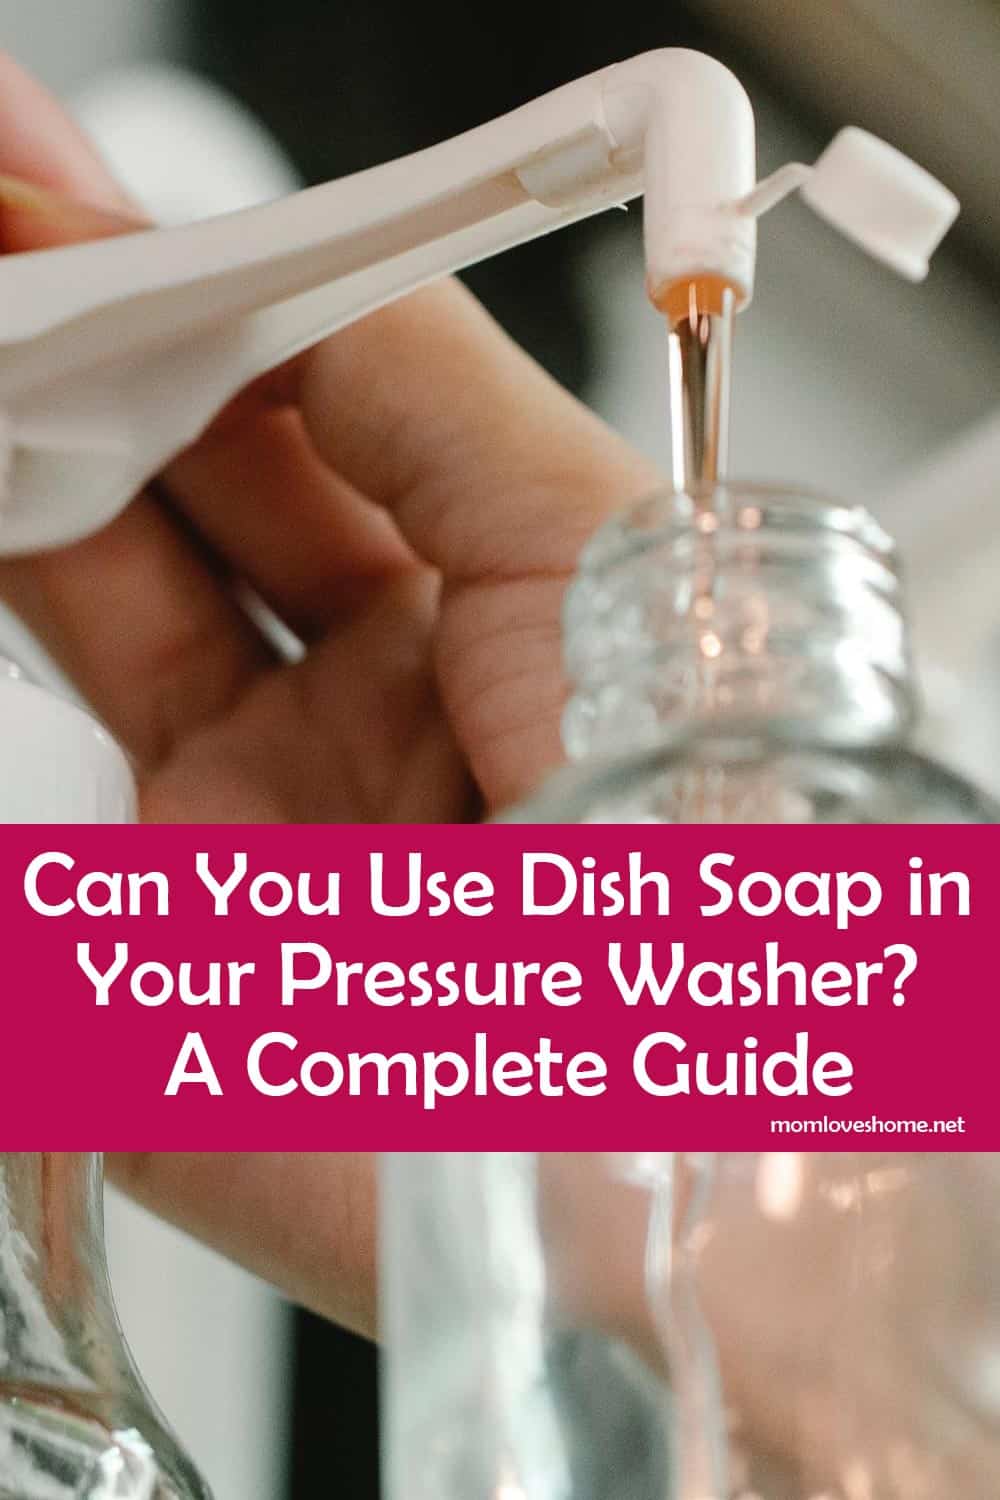 Can You Use Dish Soap in Your Pressure Washer